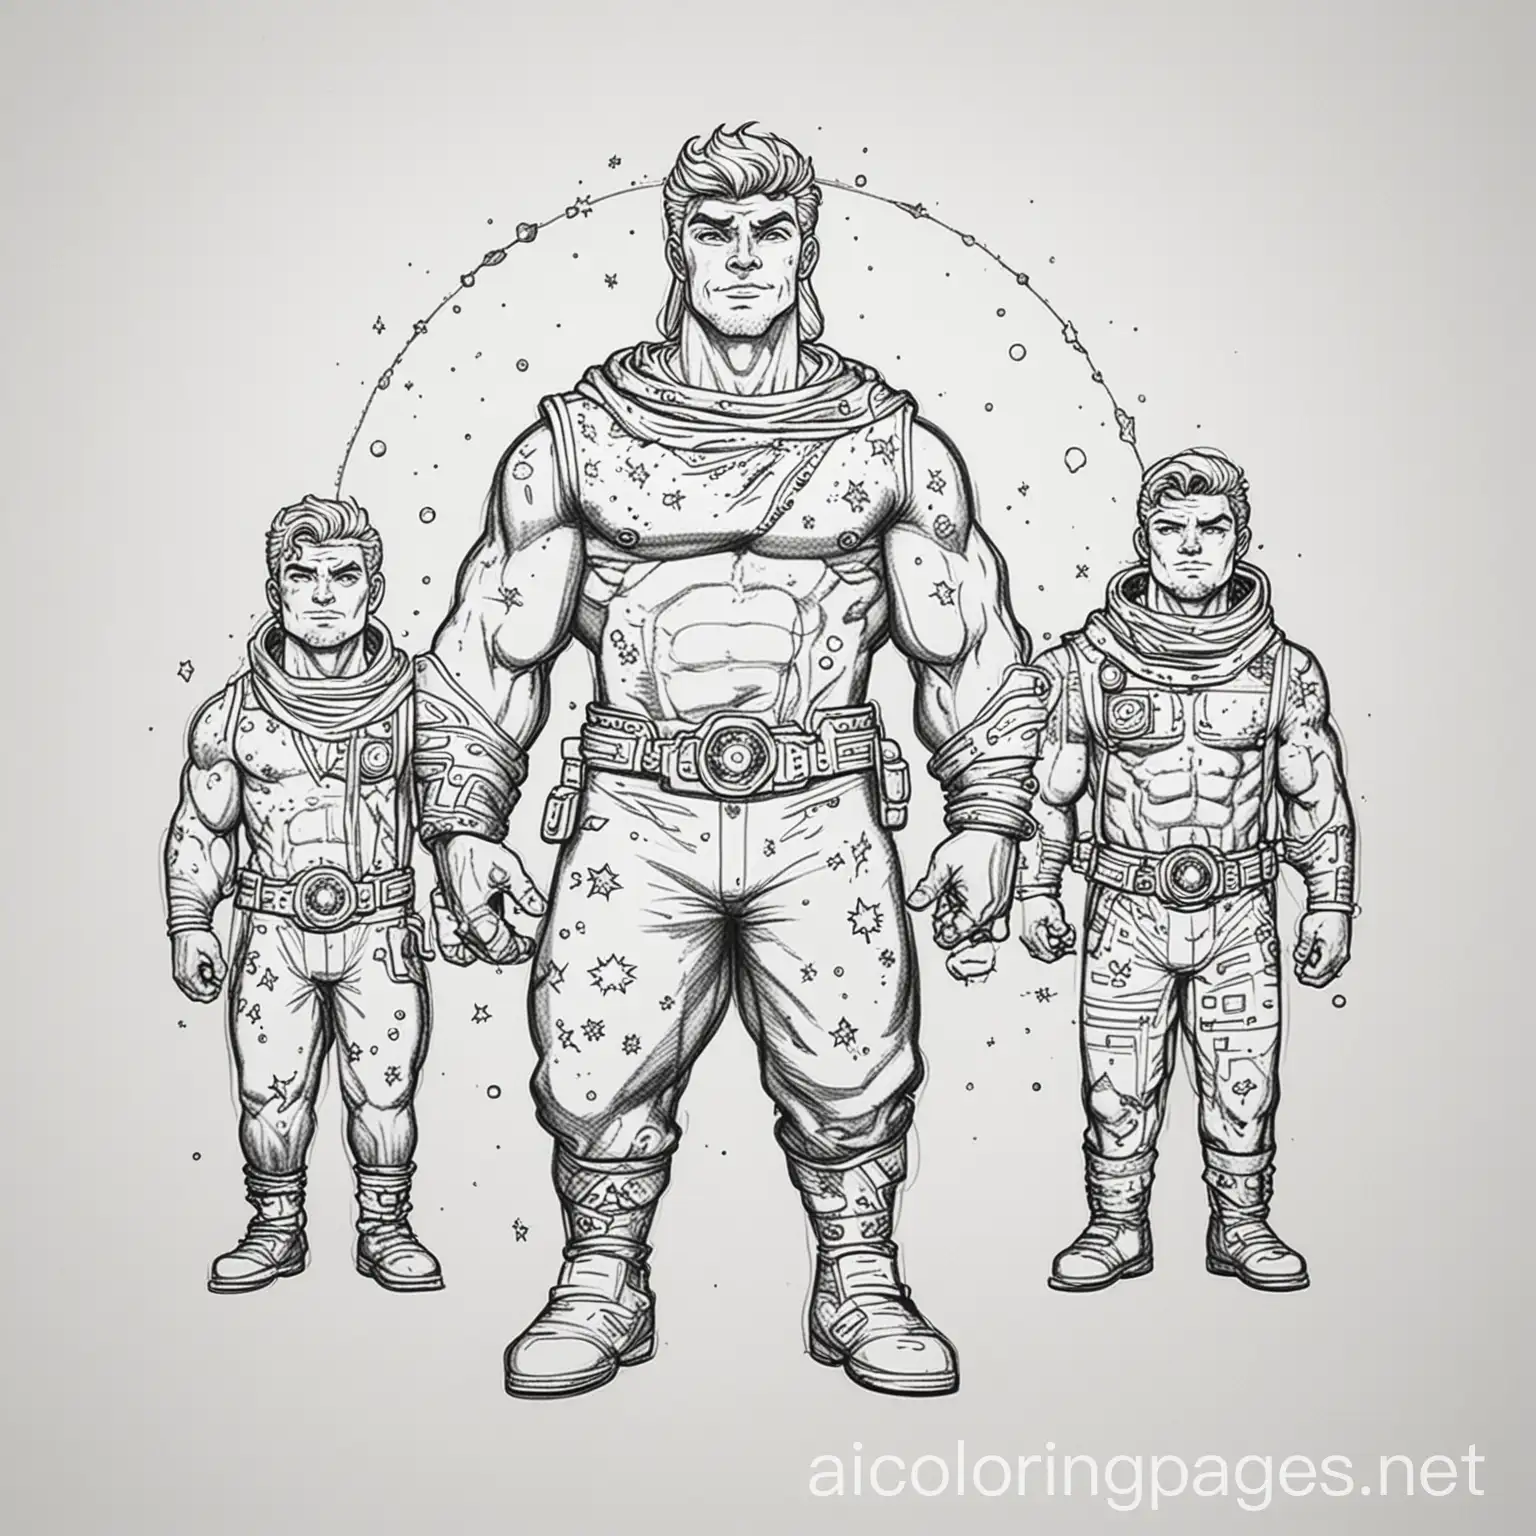 Cosmic-Dude-Surrounded-by-Two-Figures-Coloring-Page-Illustration-in-Black-and-White